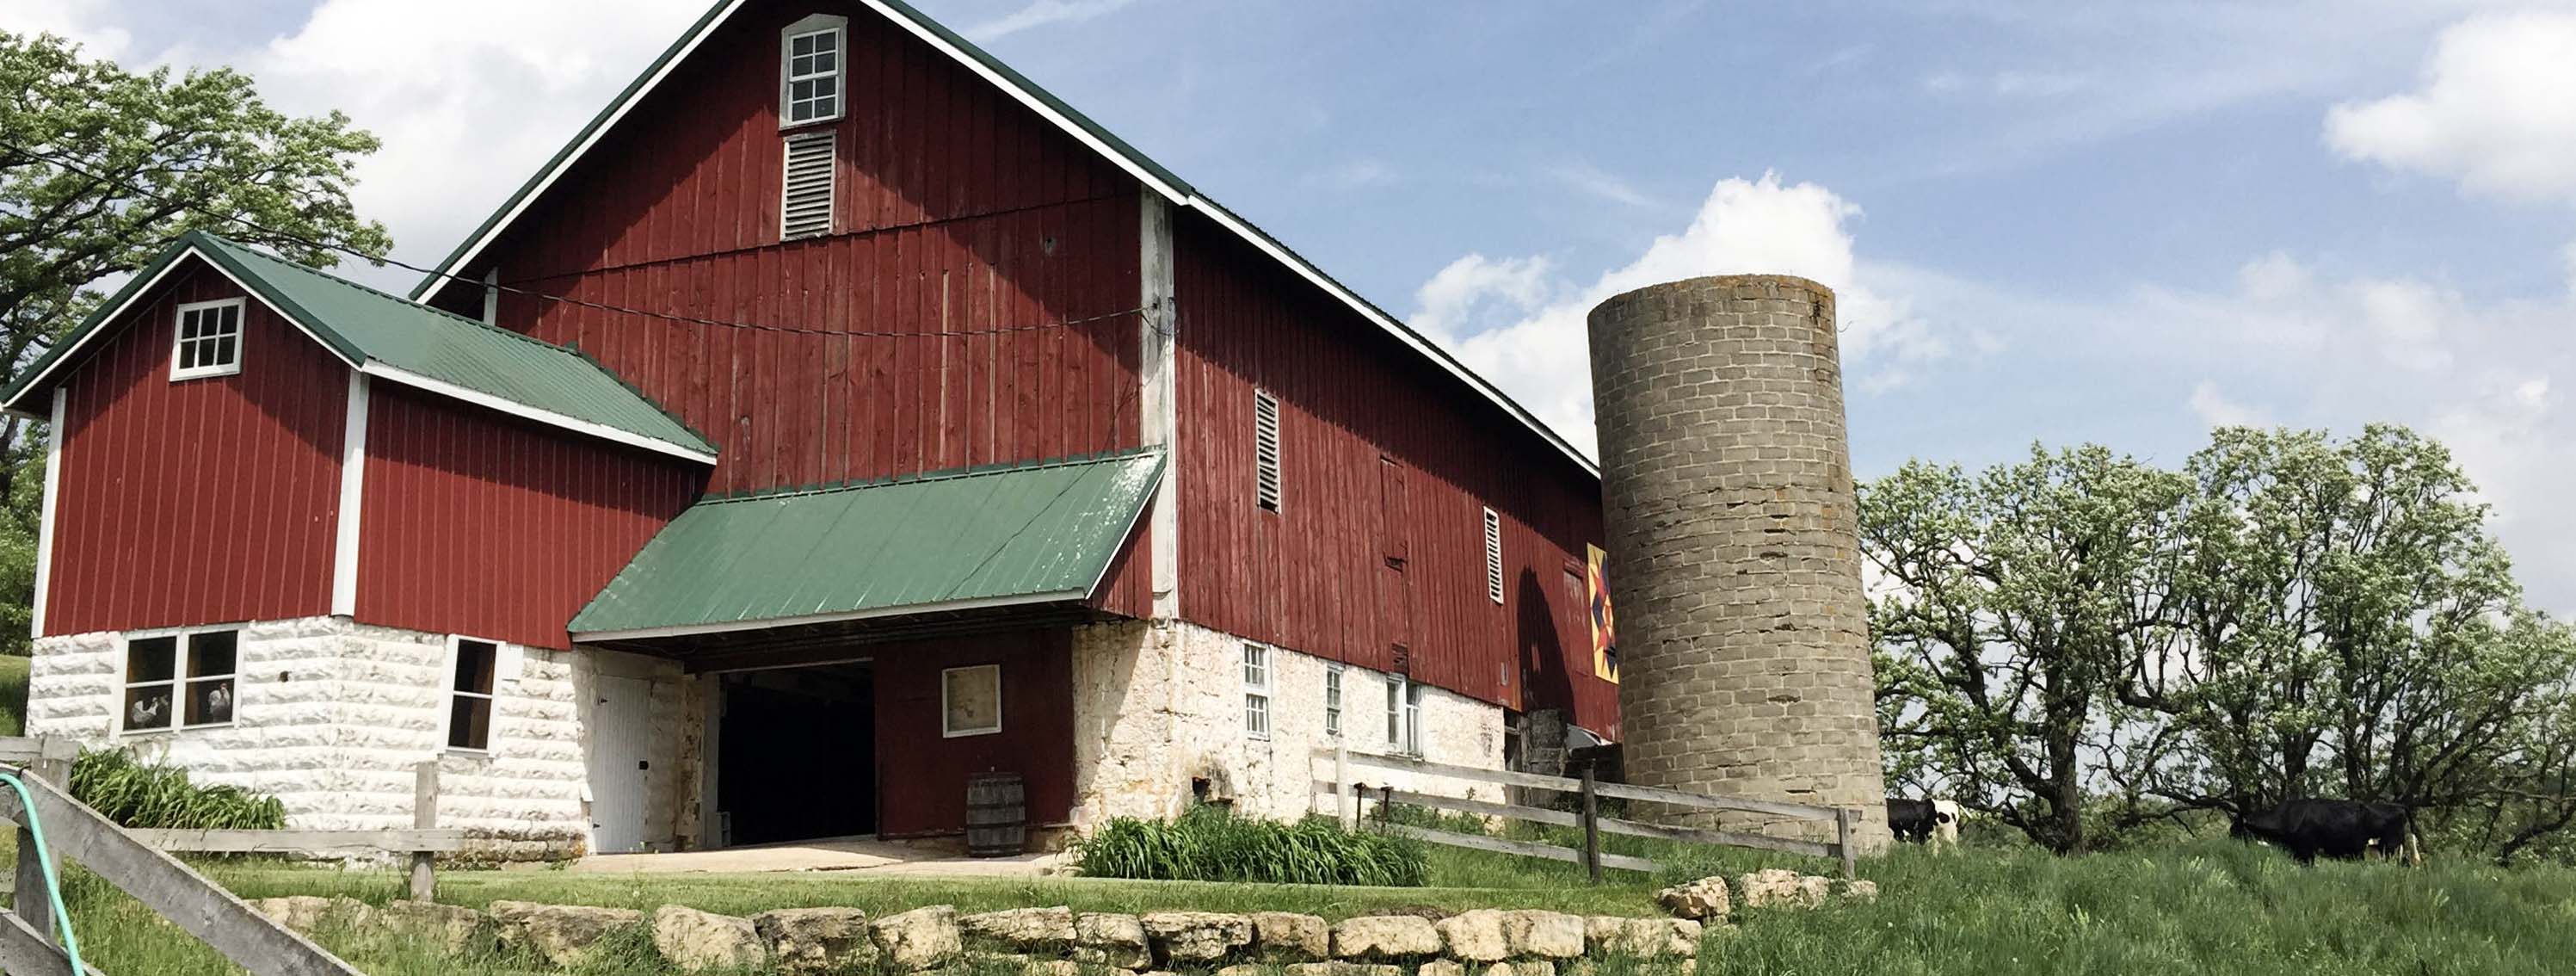 Kyle LaFond's 4th generation family farm where American Provenance started